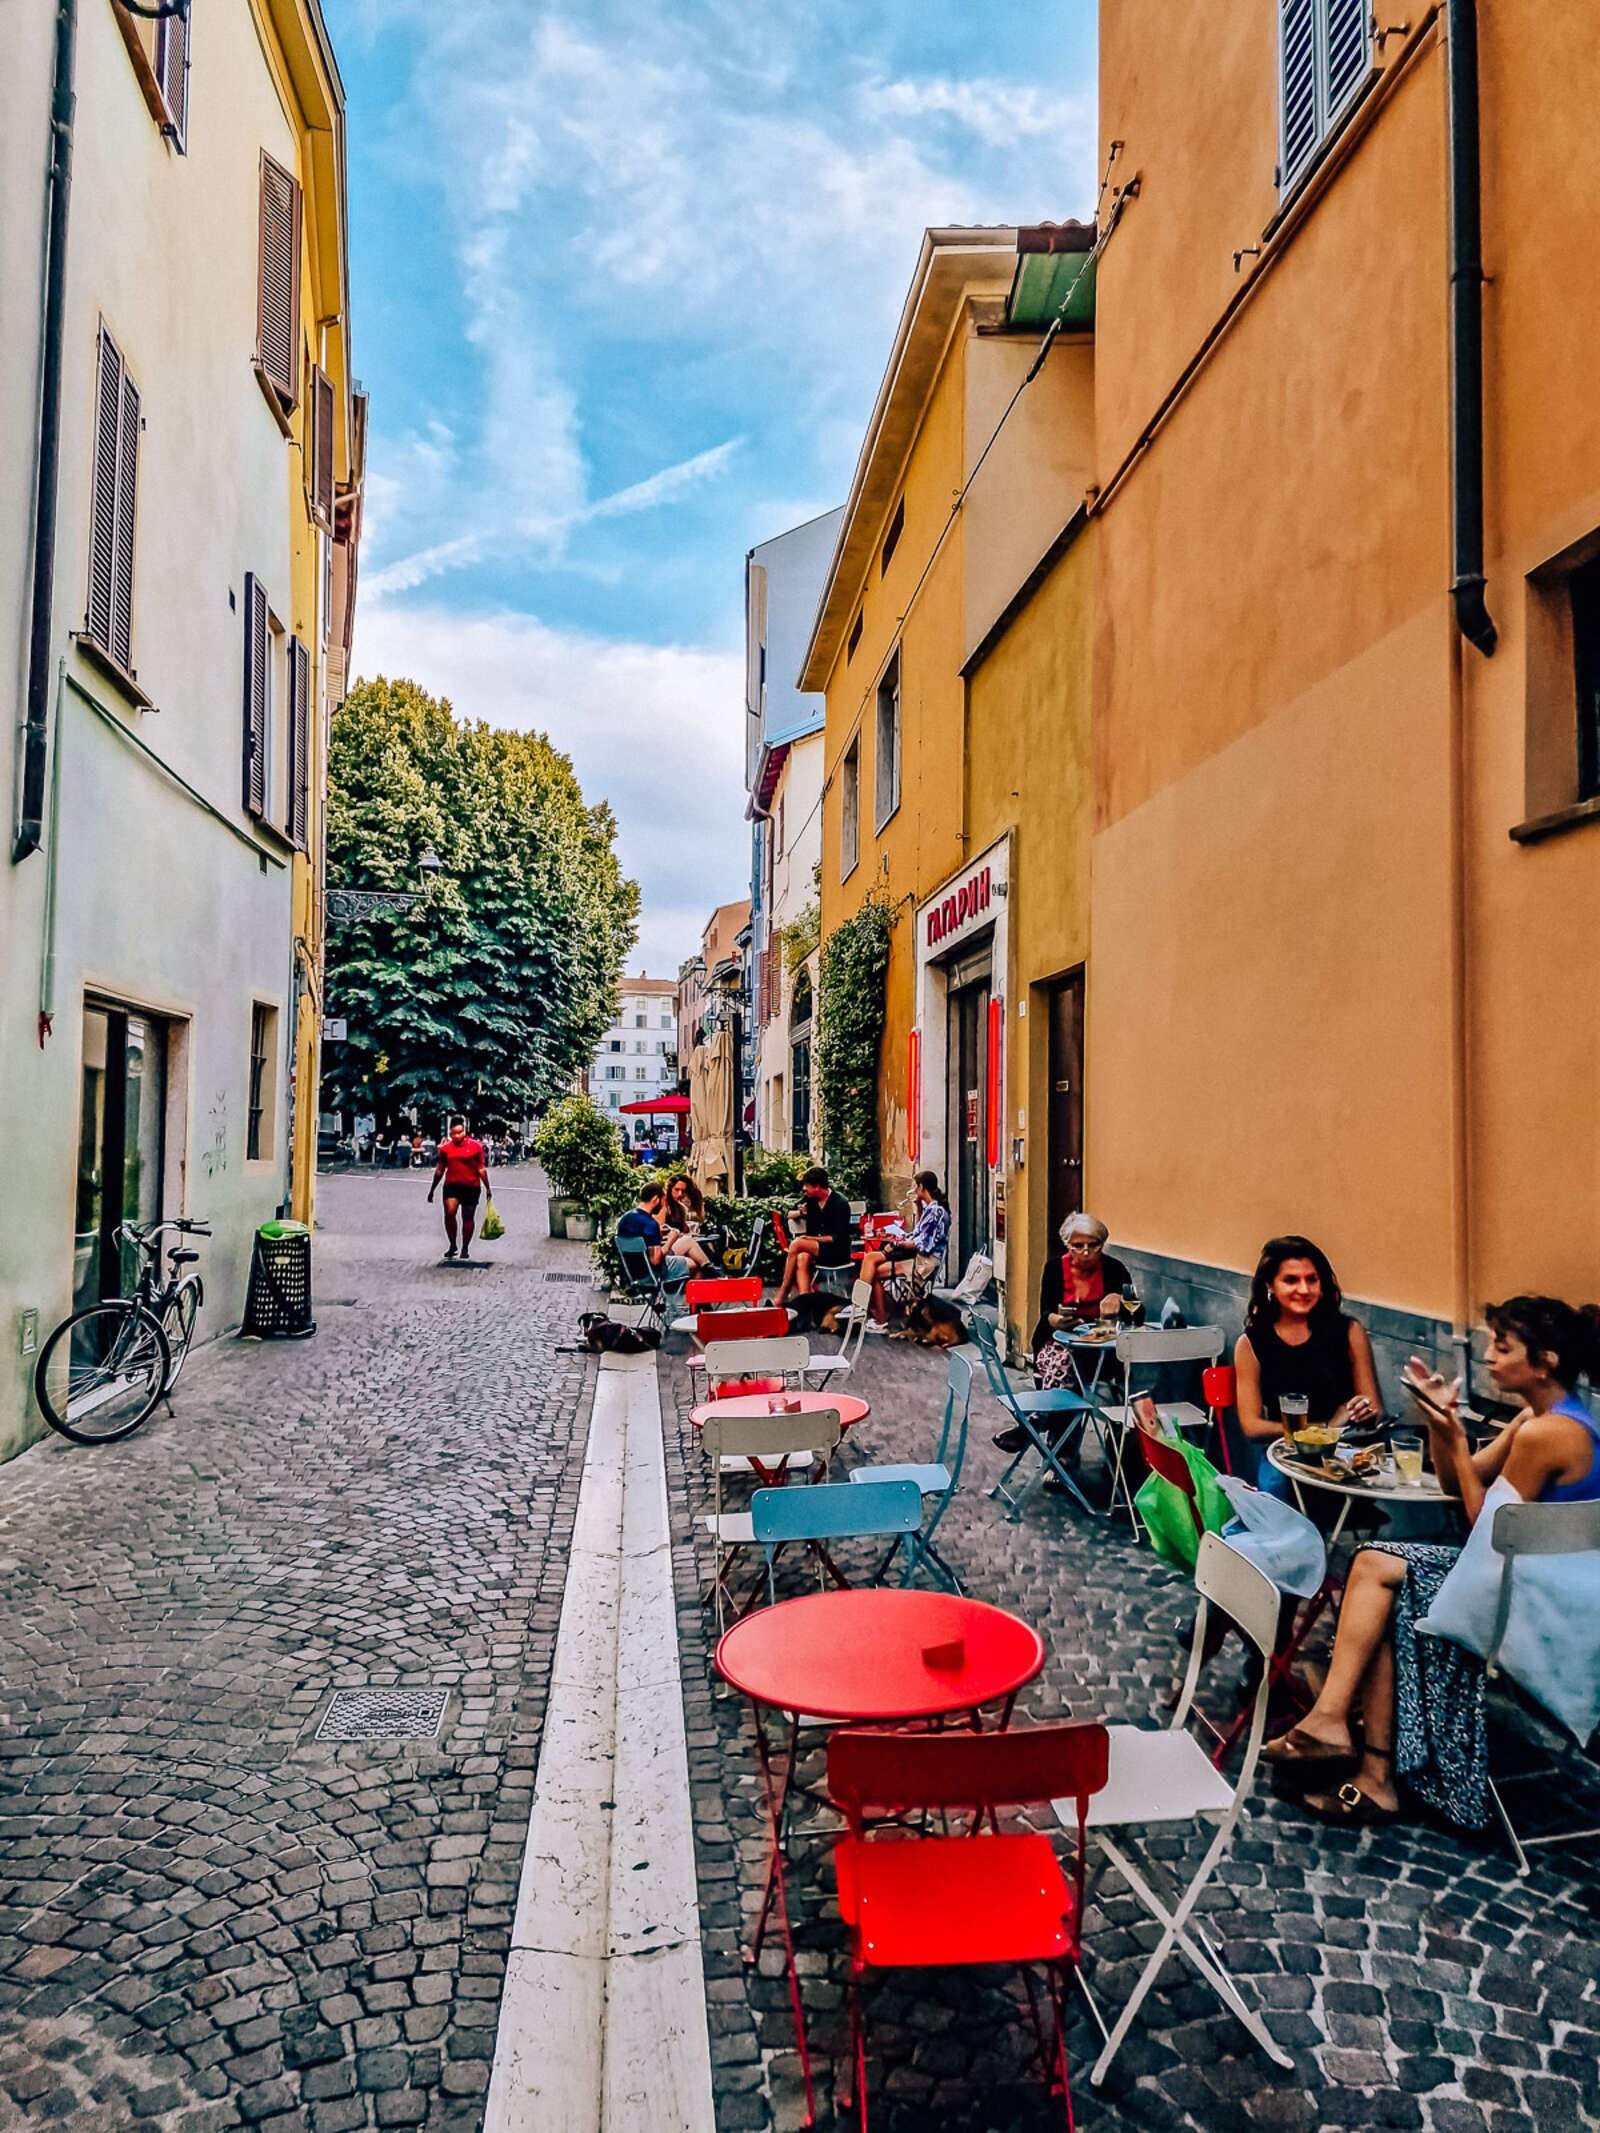 A cobblestone street with the colourful tables of a restaurant lining one side of the street